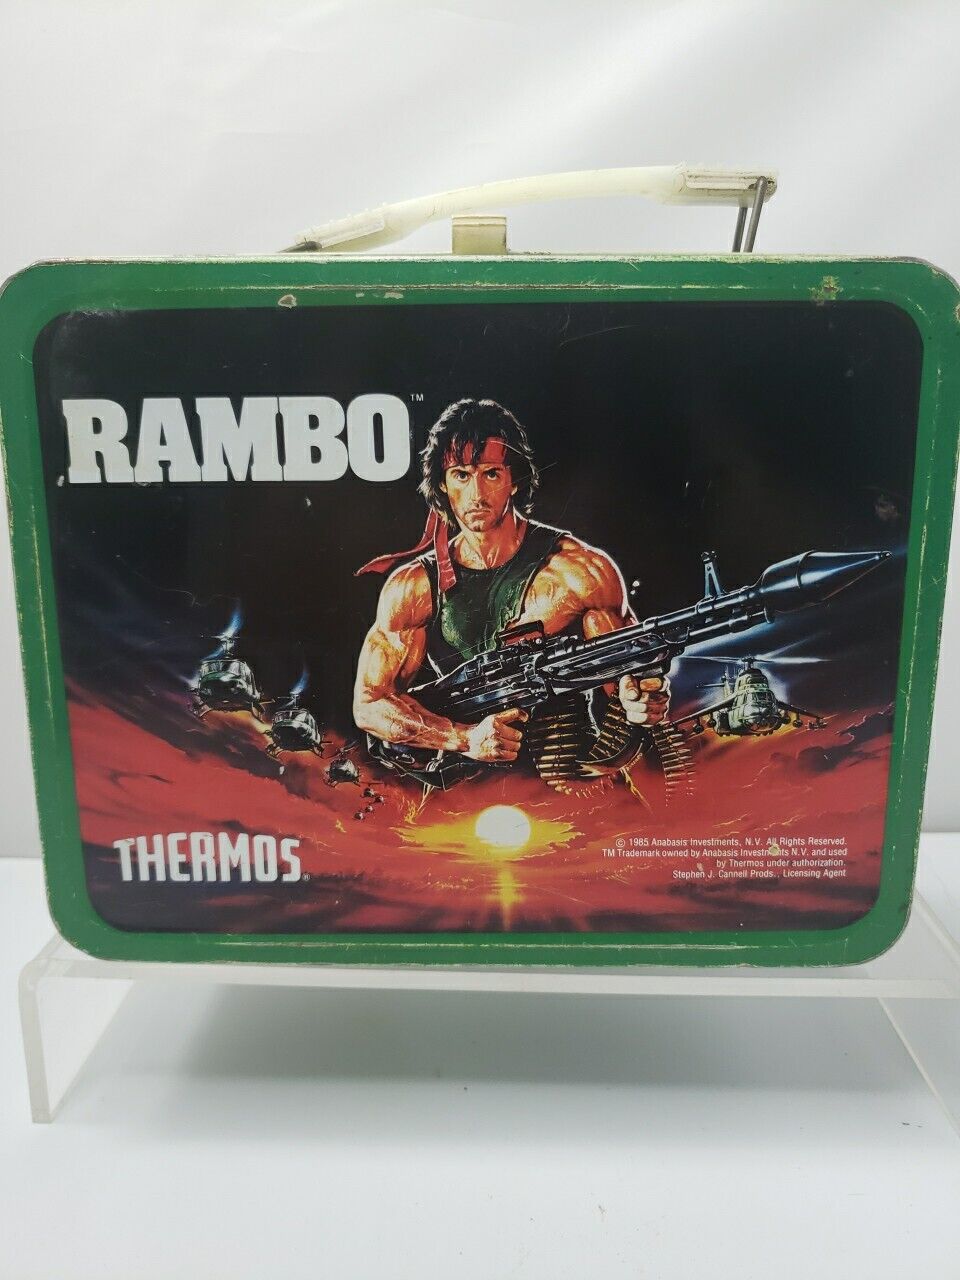 Vintage Thermos 1985 Rambo Metal Lunch Box Sylvester Stallone